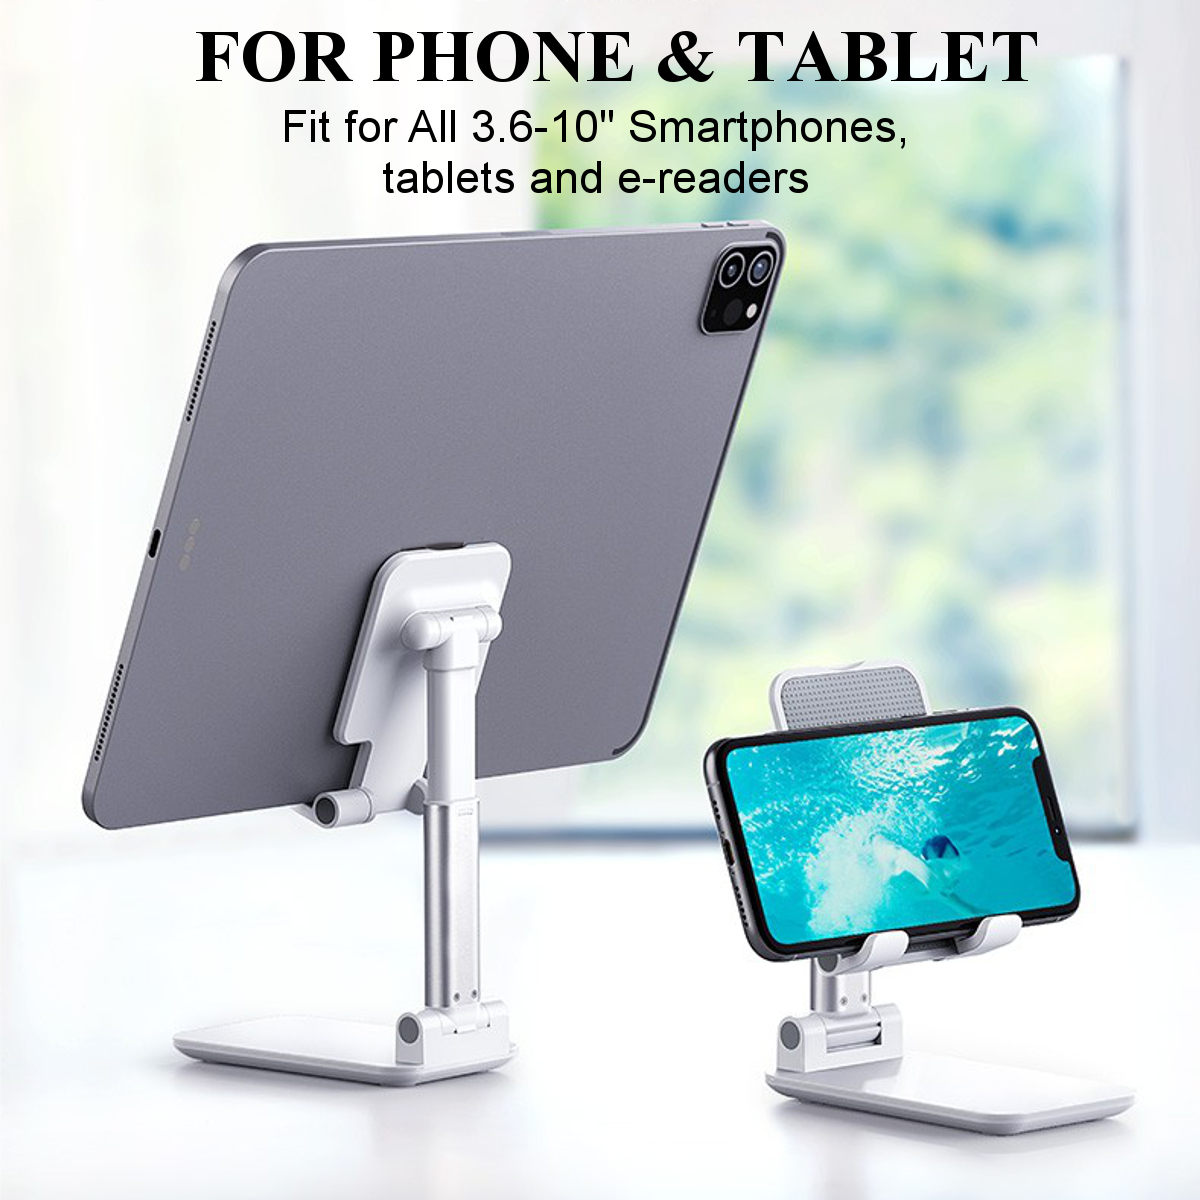 CCT9-Universal-Folding-Telescopic-Desktop-Mobile-Phone-Tablet-Holder-Stand-for-iPad-Air-for-iPhone-1-1820698-2